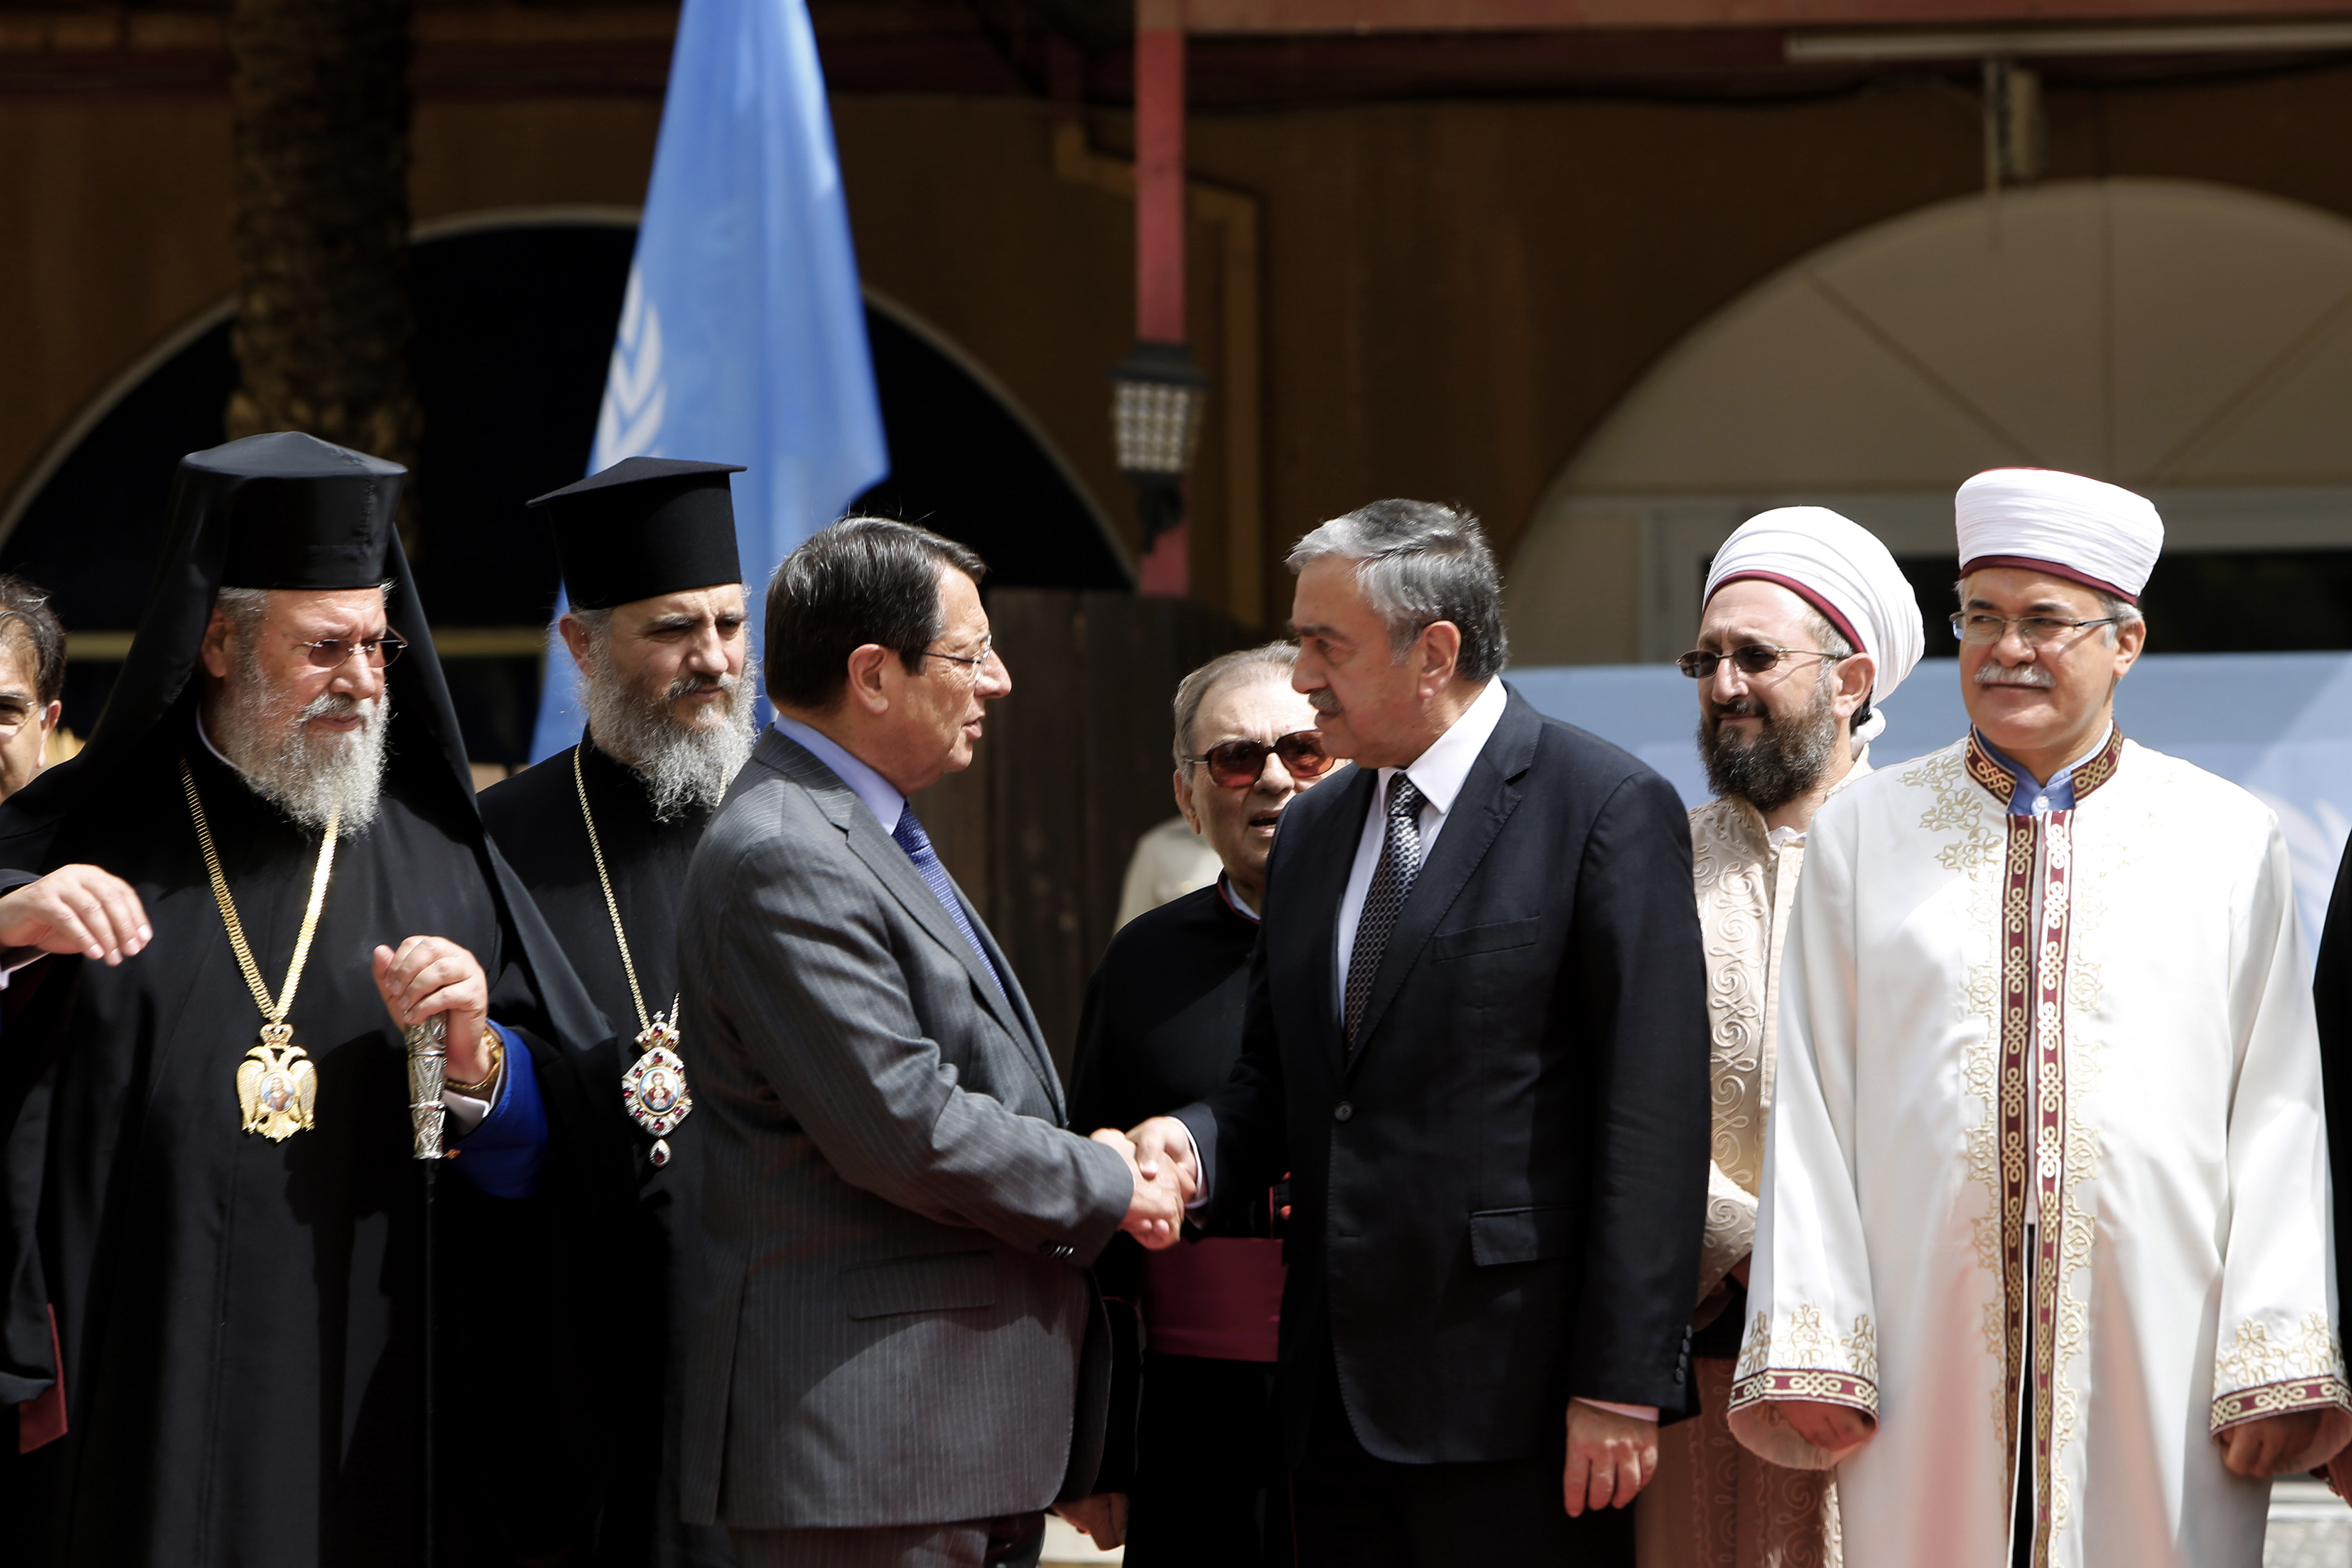 Cyprus' president Nicos Anastasiades, Turkish Cypriot leader Mustafa Akinci shake hands as the Greek Cypriot Orthodox Archbishop Chrysostomos II, left, and the Turkish Cypriot religious leader Mufti Yalip Atalay look on after a meeting at UN buffer zone at Ledra palace hotel in divided capital Nicosia, Cyprus, Thursday, Sept. 10, 2015. The heads of Cyprus' Christian and Muslim communities are meeting with the ethnically divided island's rival leaders to lend their support to ongoing reunification talks. Photo: AP